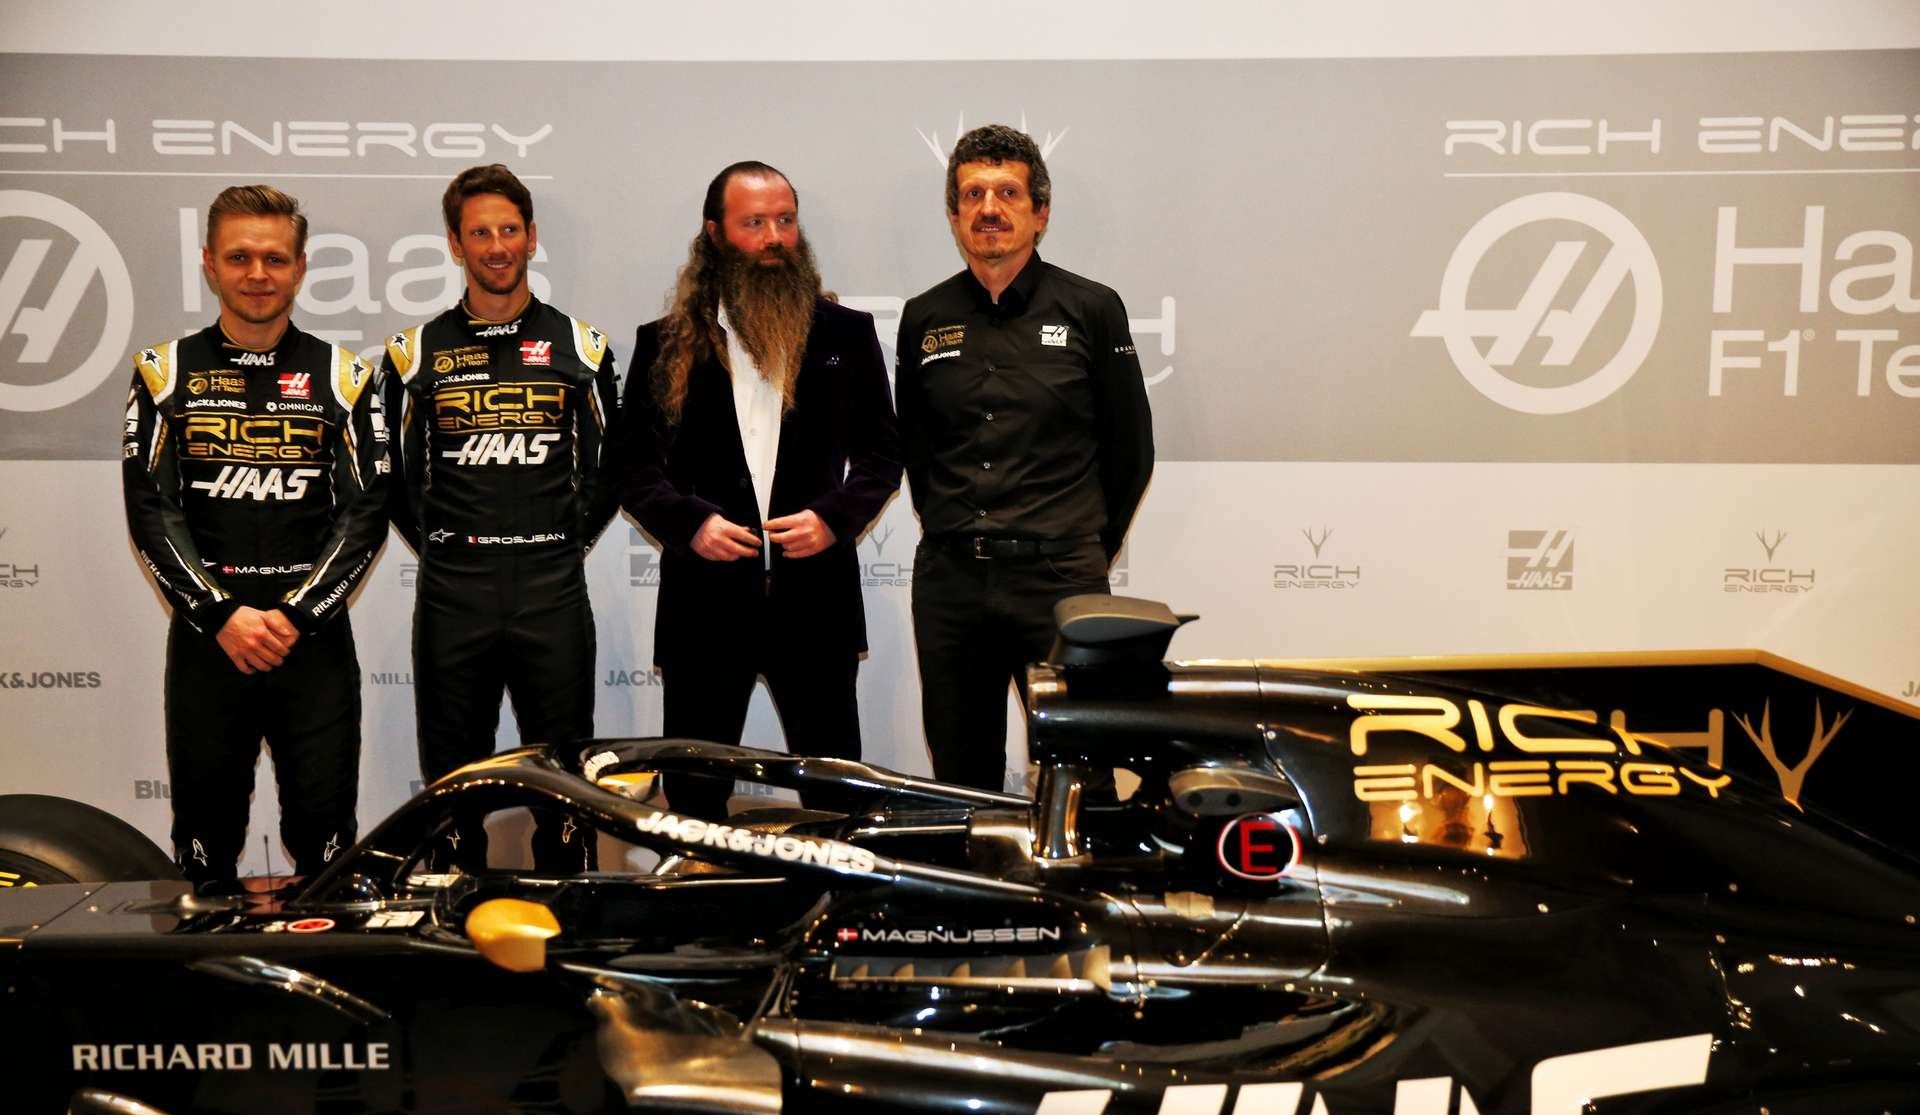 Haas and Rich Energy